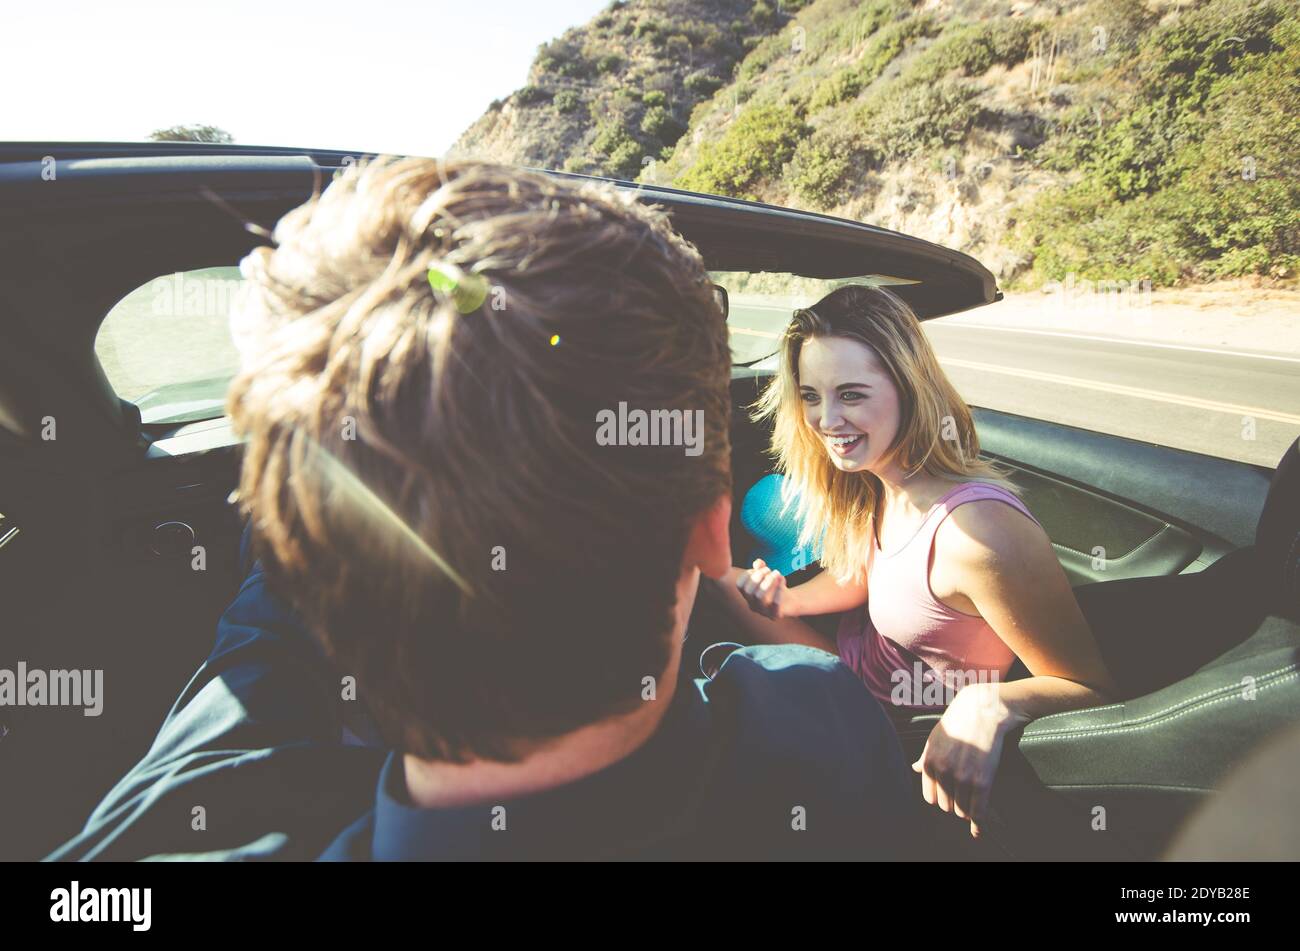 Rear View Of Couple Sitting In Car Stock Photo